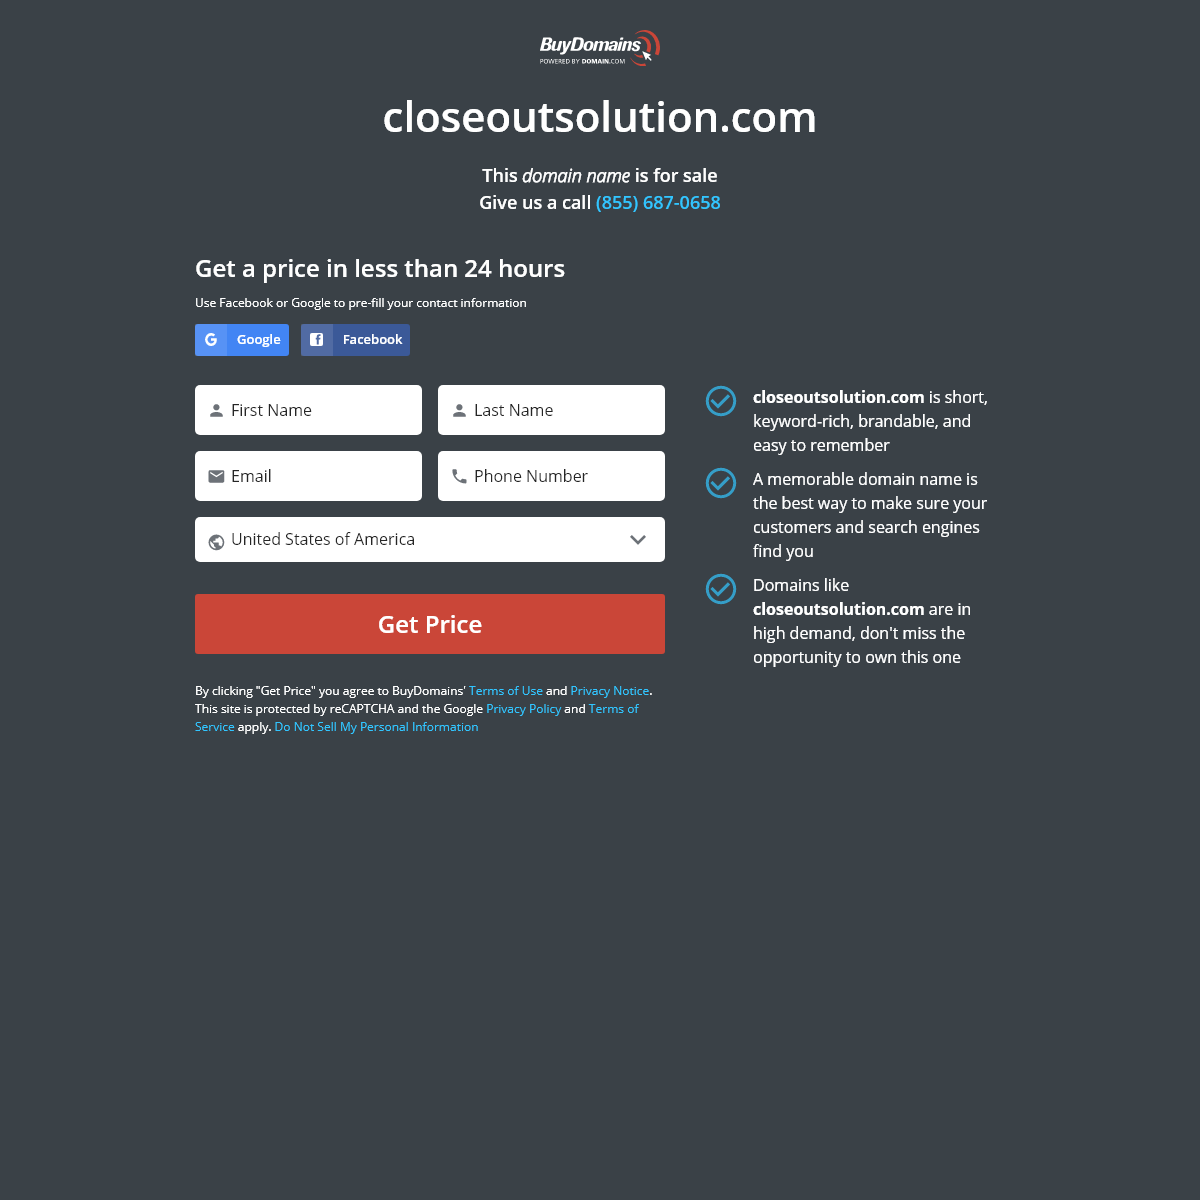 A complete backup of closeoutsolution.com